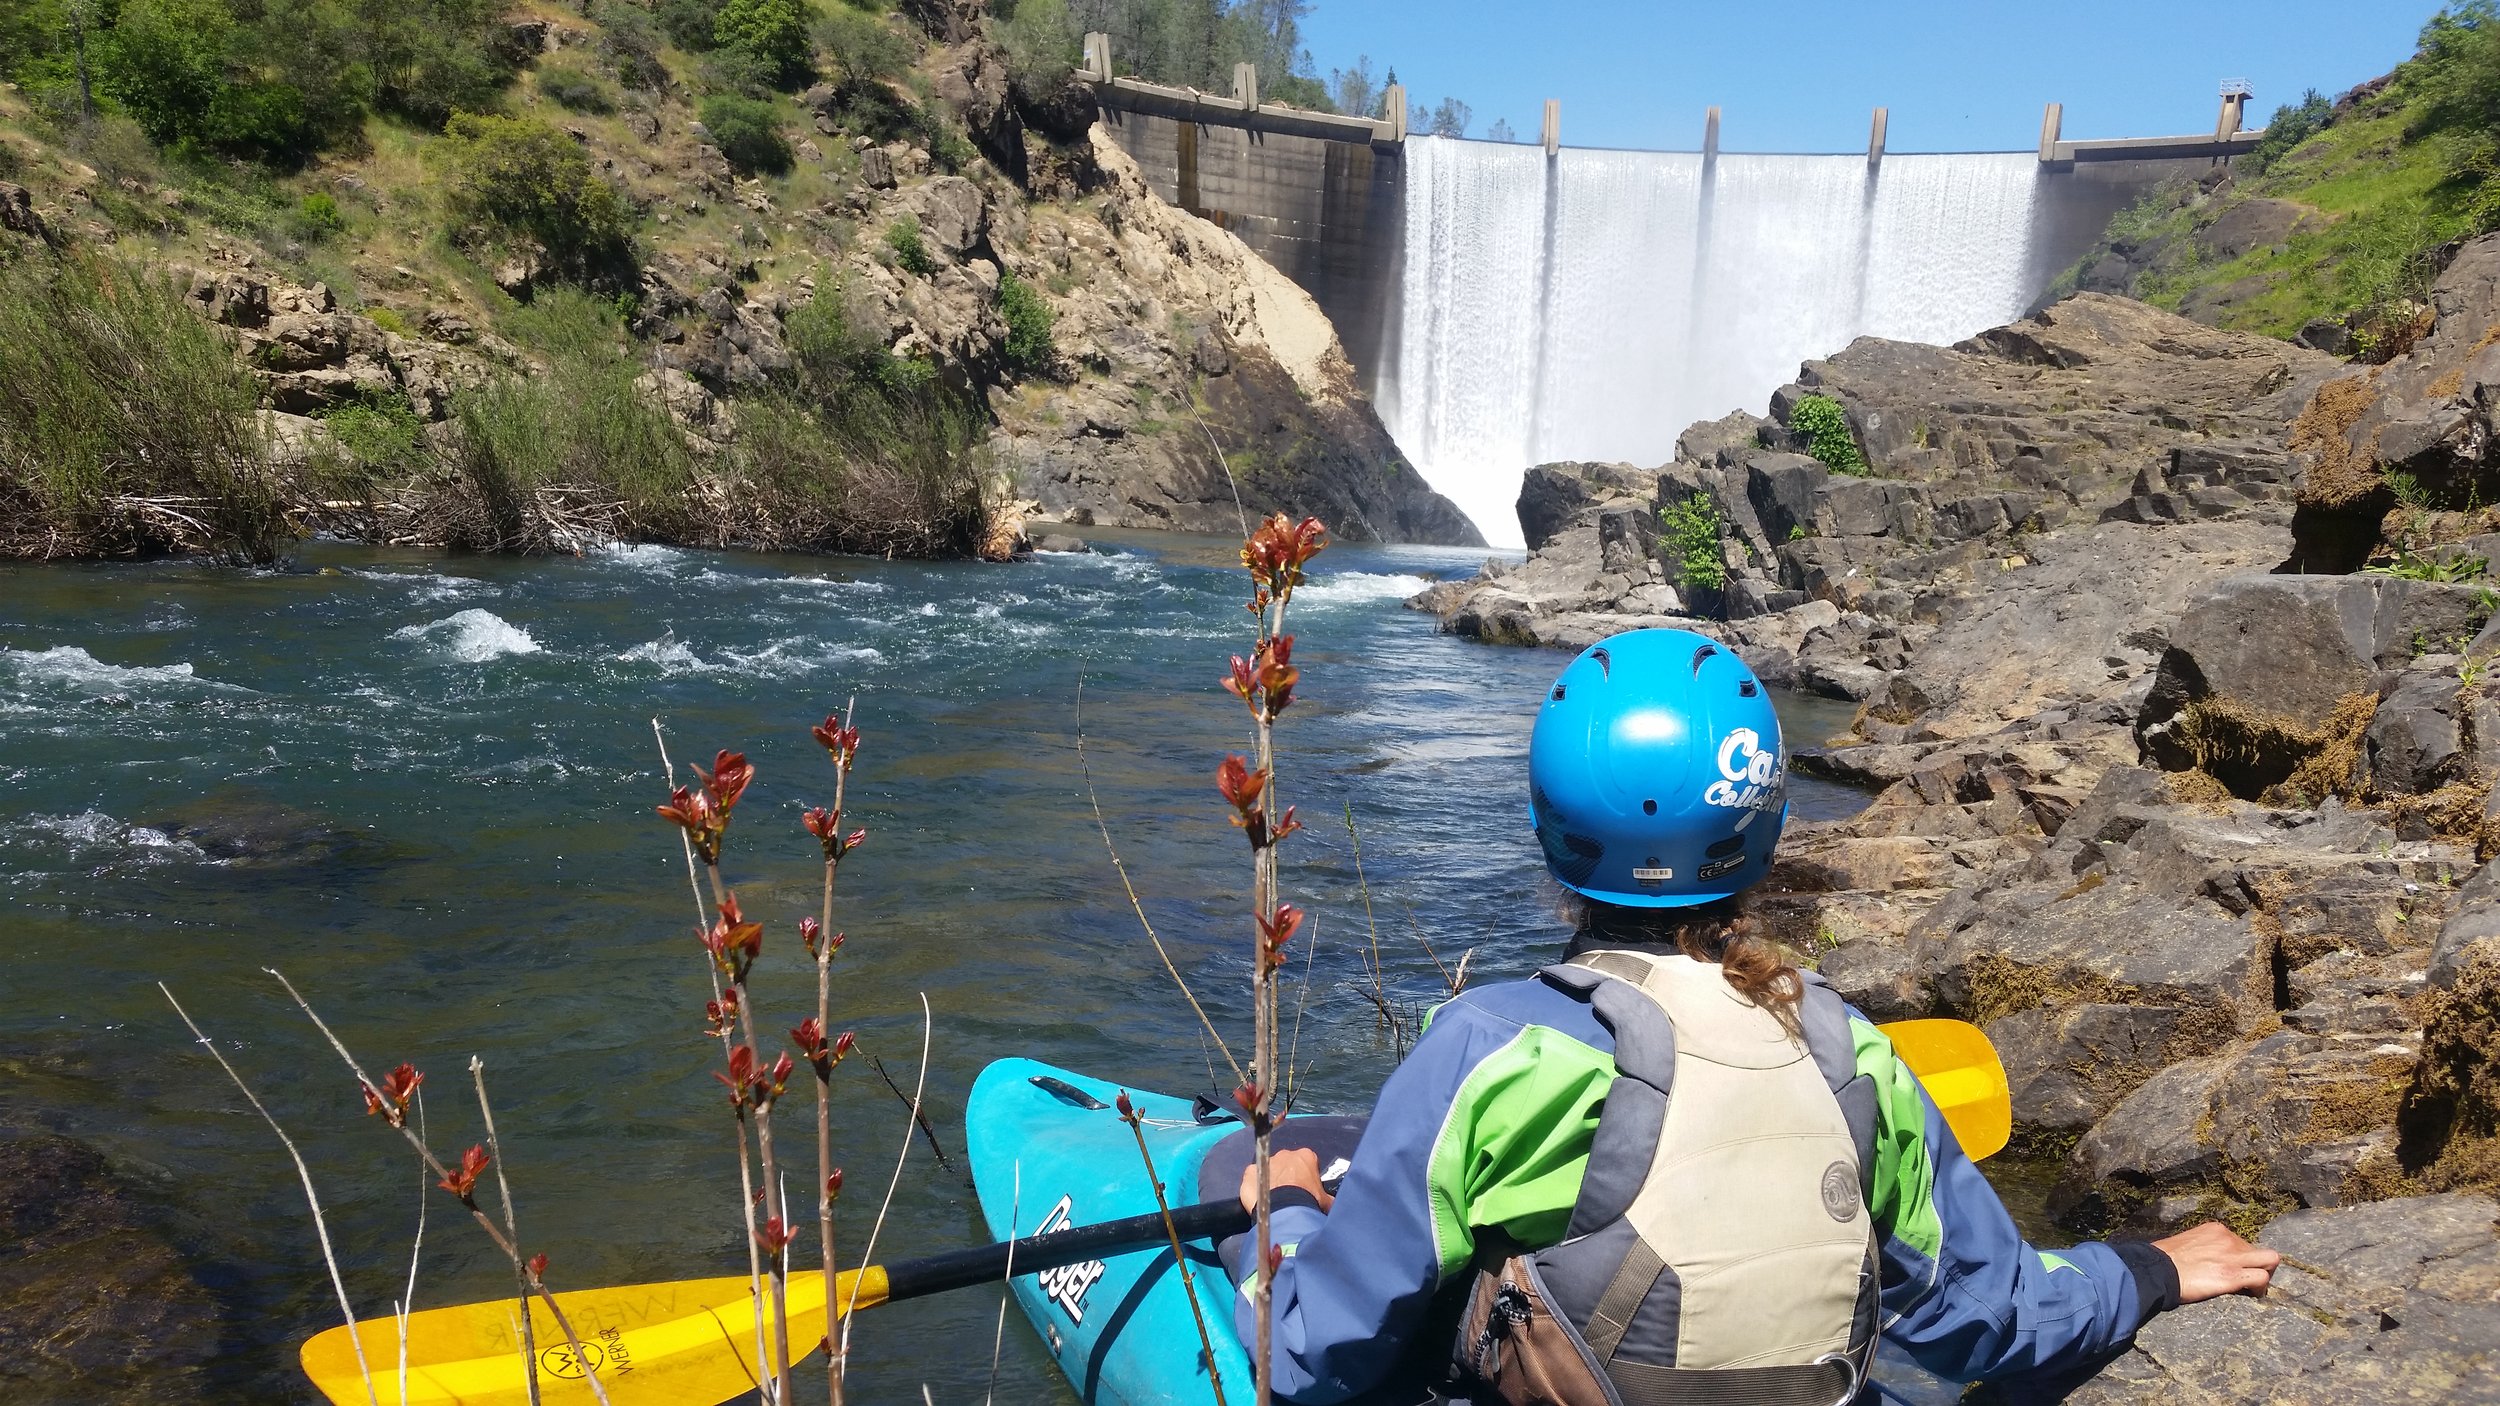 Sarita at the put-in on the North Fork American River